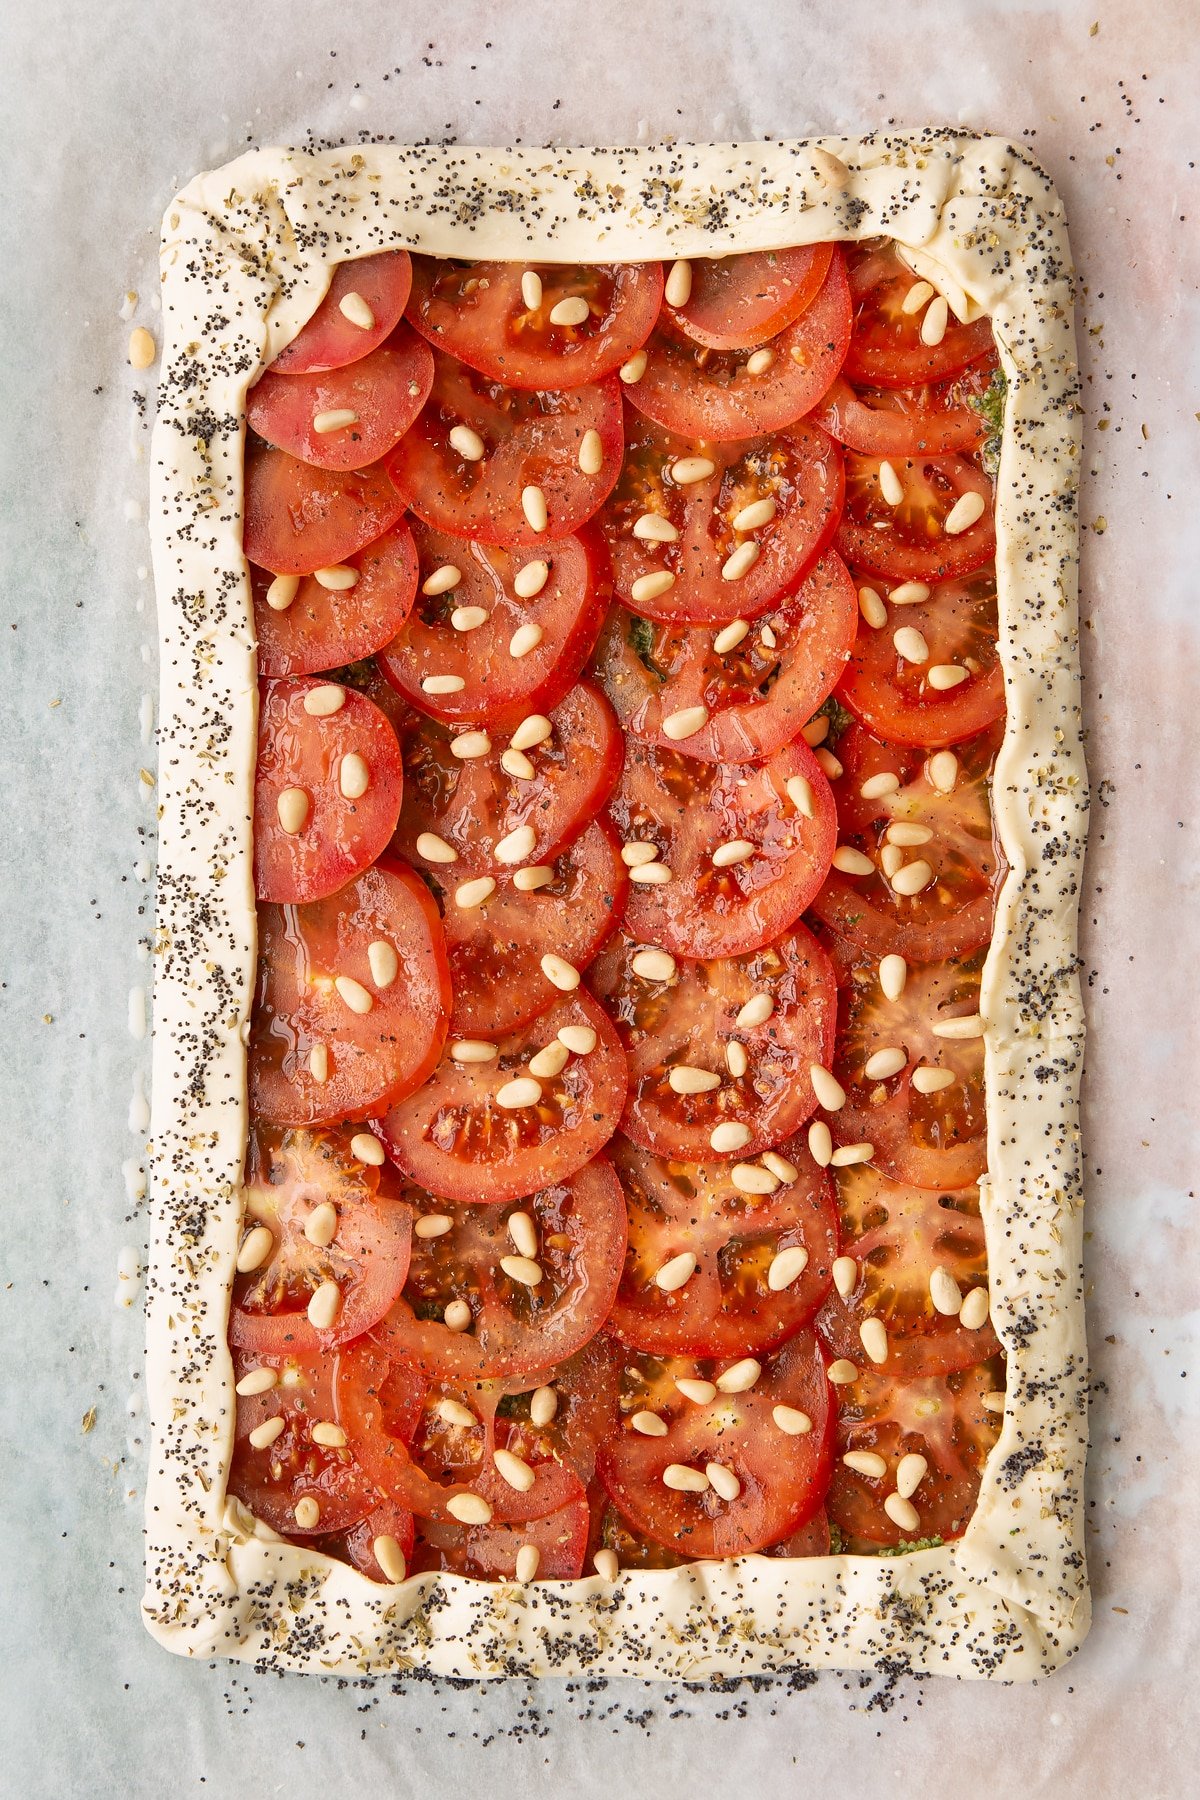 Sprinkling the untoasted pine nuts over the tomatoes.